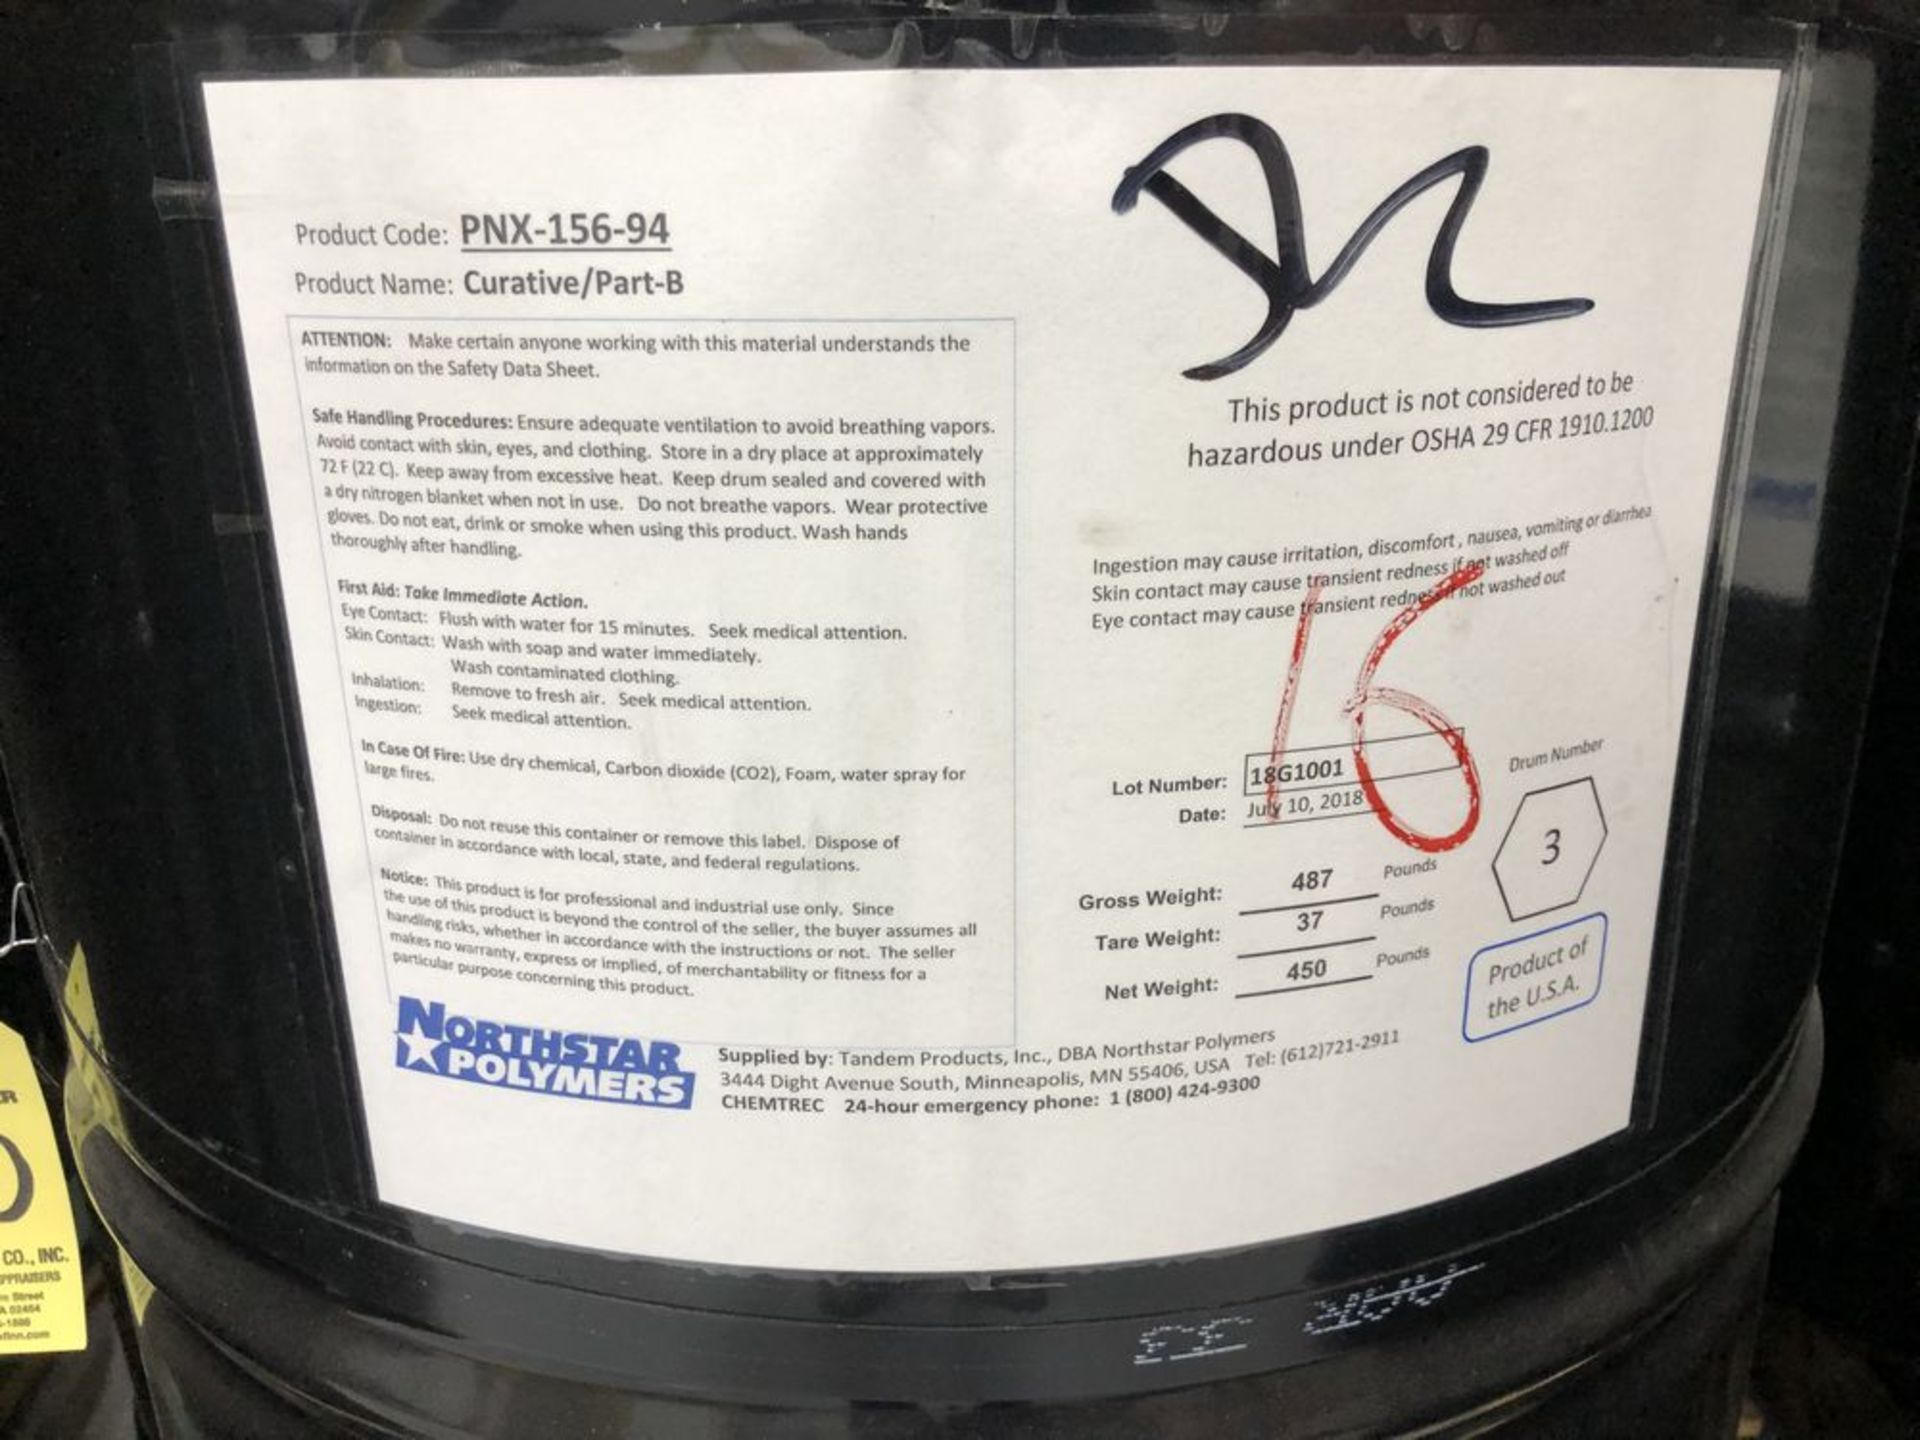 LOT (3) Northstar Polymers B Material Polyol Curing Agent, Custom CAS #, 3 Barrels @ 450lbs Each (o - Image 2 of 2